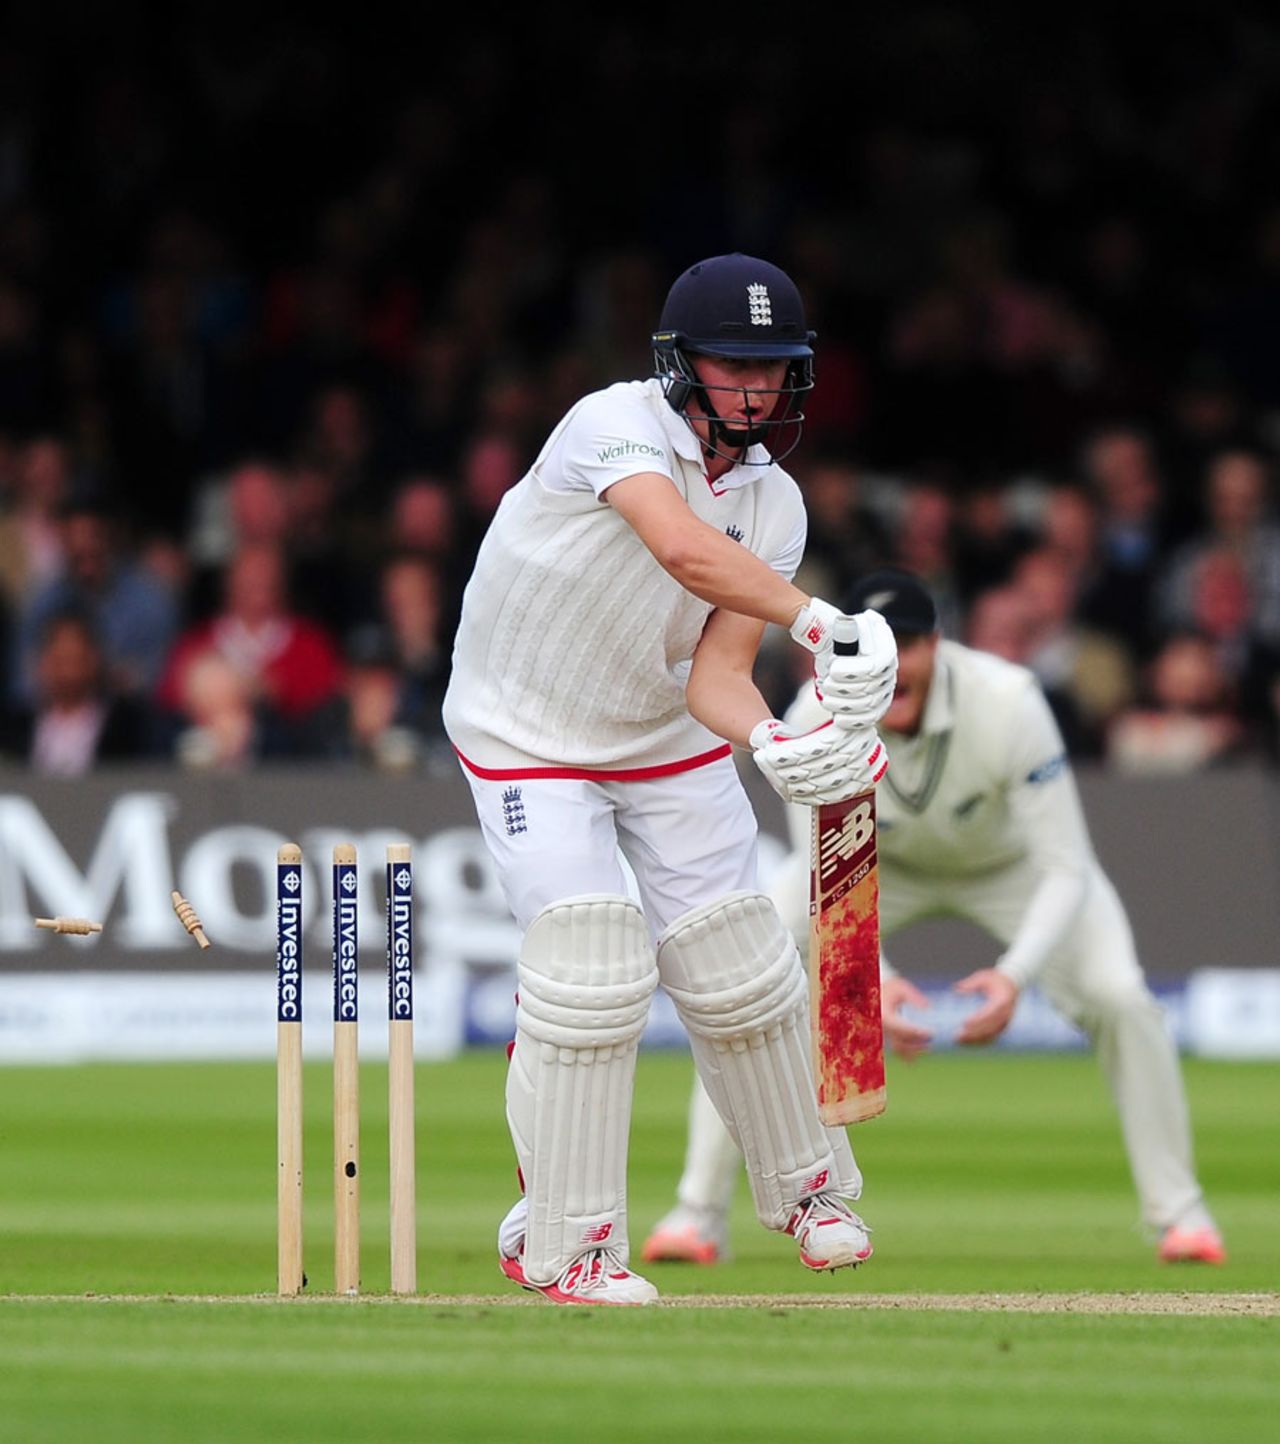 Gary Ballance was undone by a perfect delivery, England v New Zealand, 1st Investec Test, Lord's, 3rd day, May 23, 2015